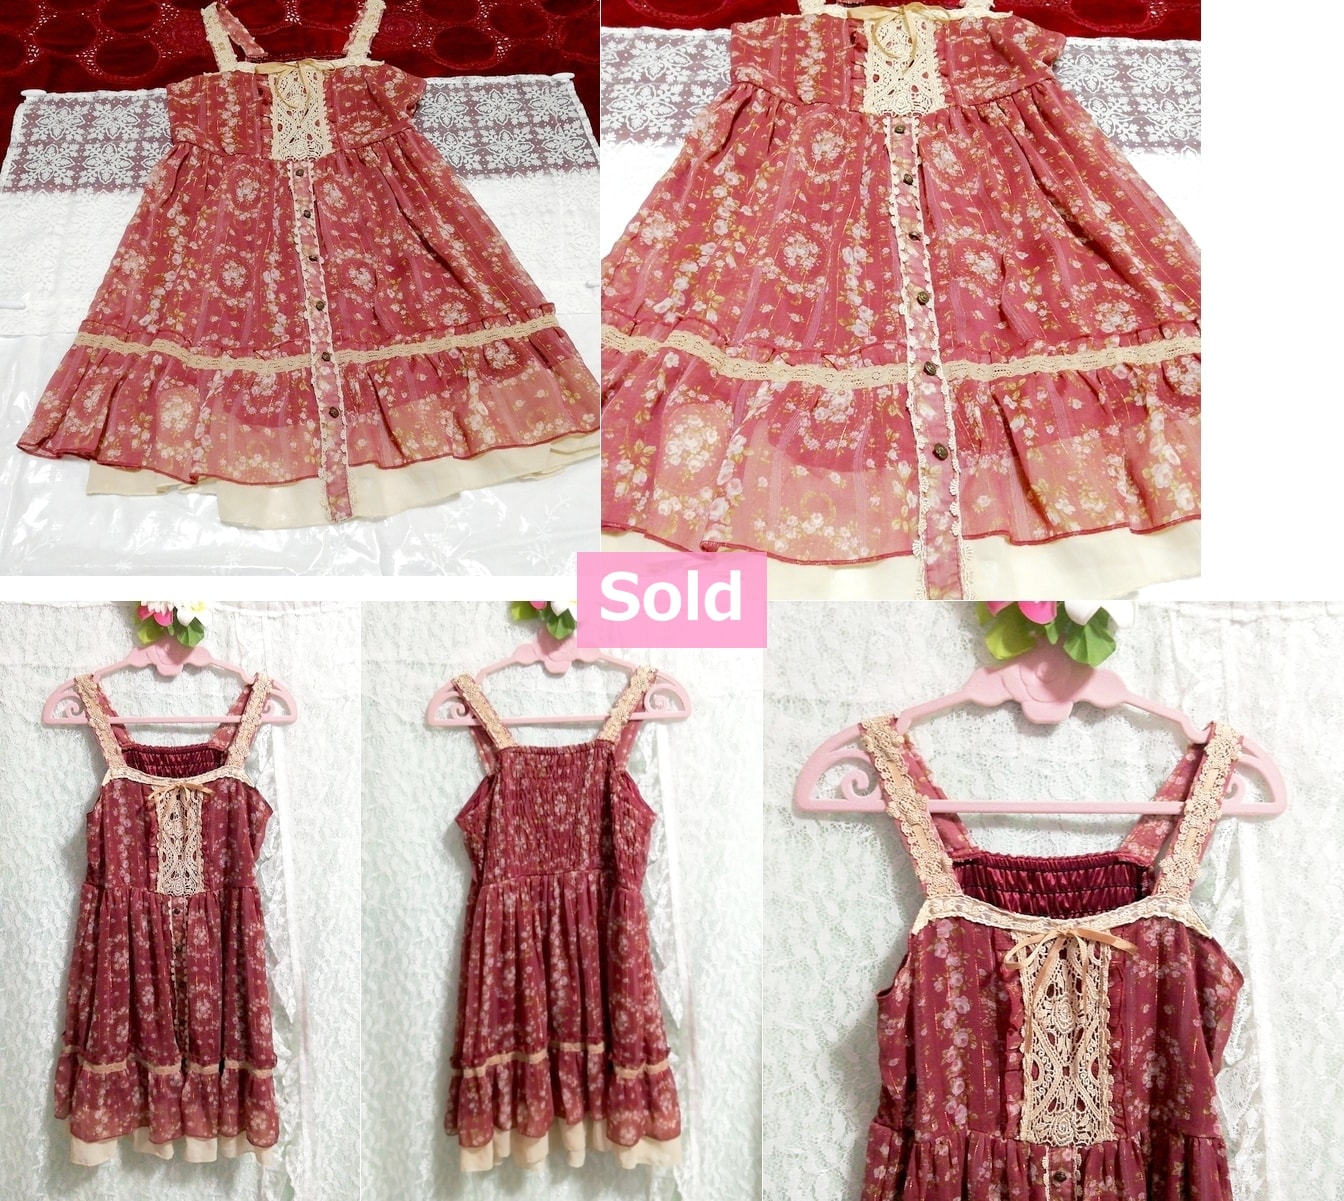 Red pink purple floral girly chiffon camisole dress Red pink purple floral girly chiffon camisole dress